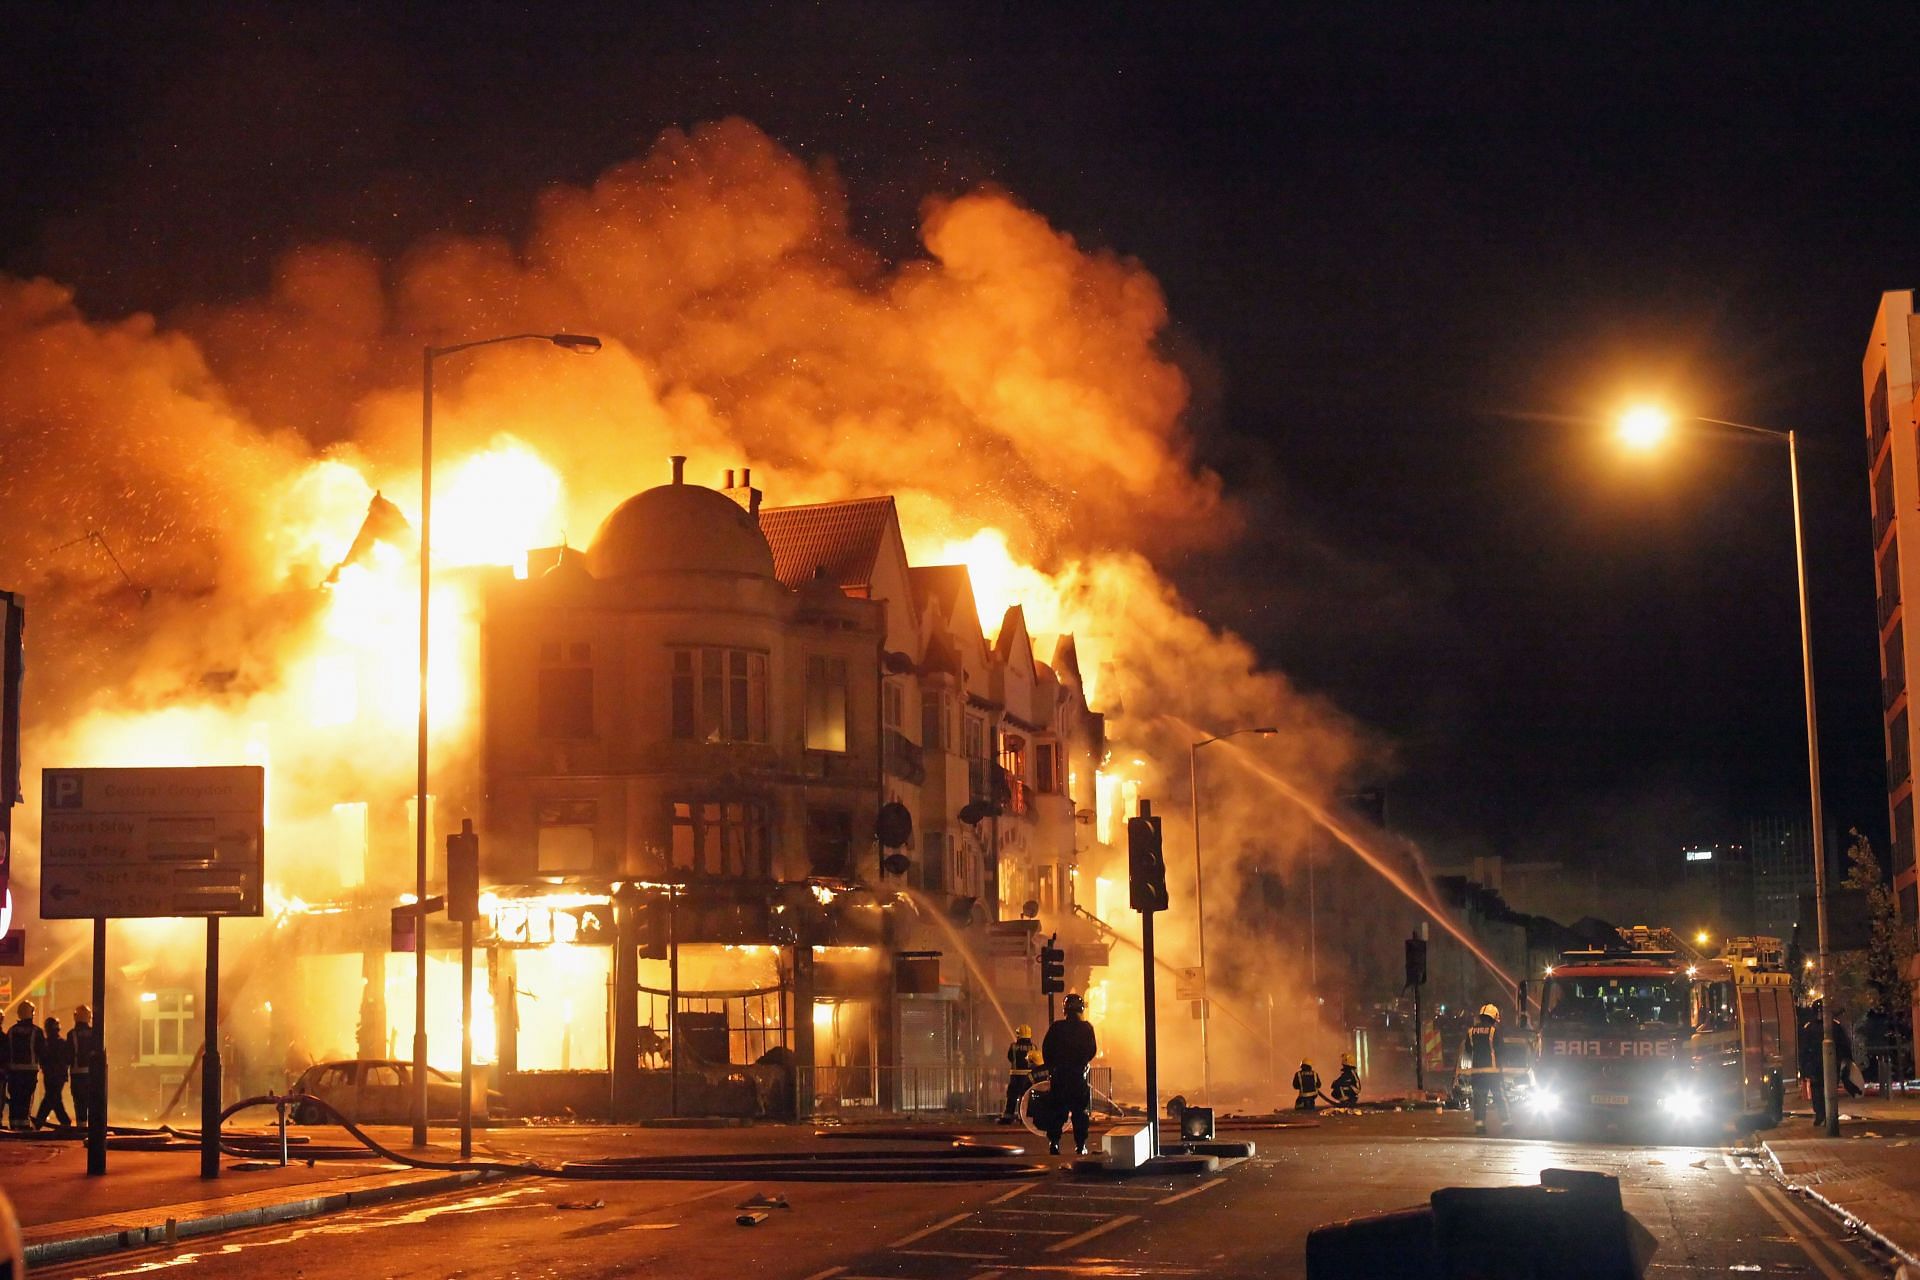 Riots broke out across London following Duggan&#039;s death in 2011 (Image via Getty Images)